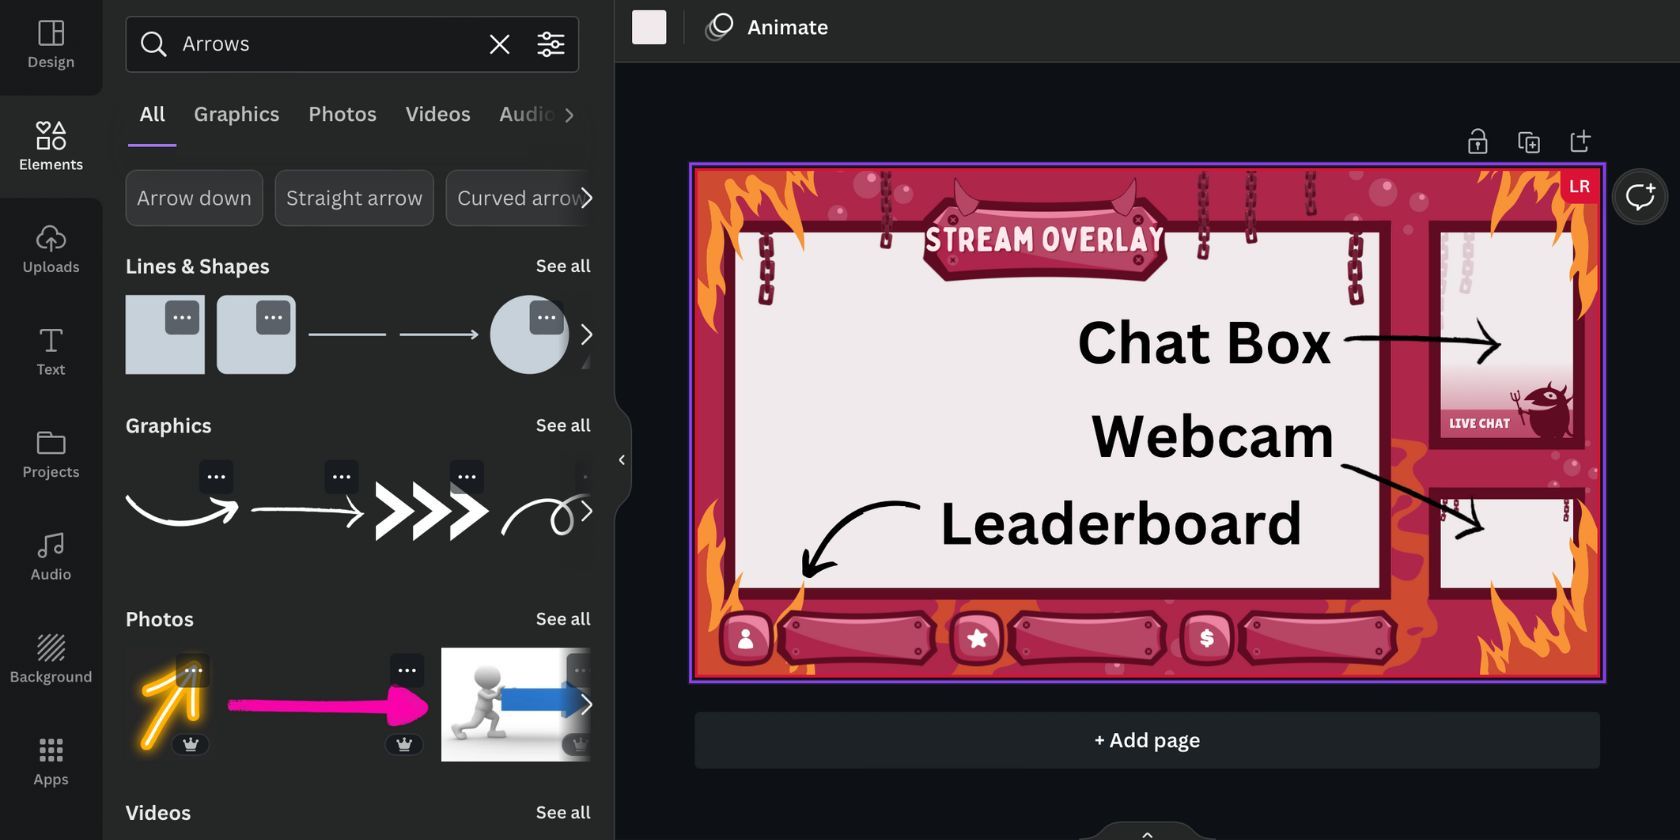 Twitch Stream Overlay on Canva with Chat Box Webcam Window and Leaderboard